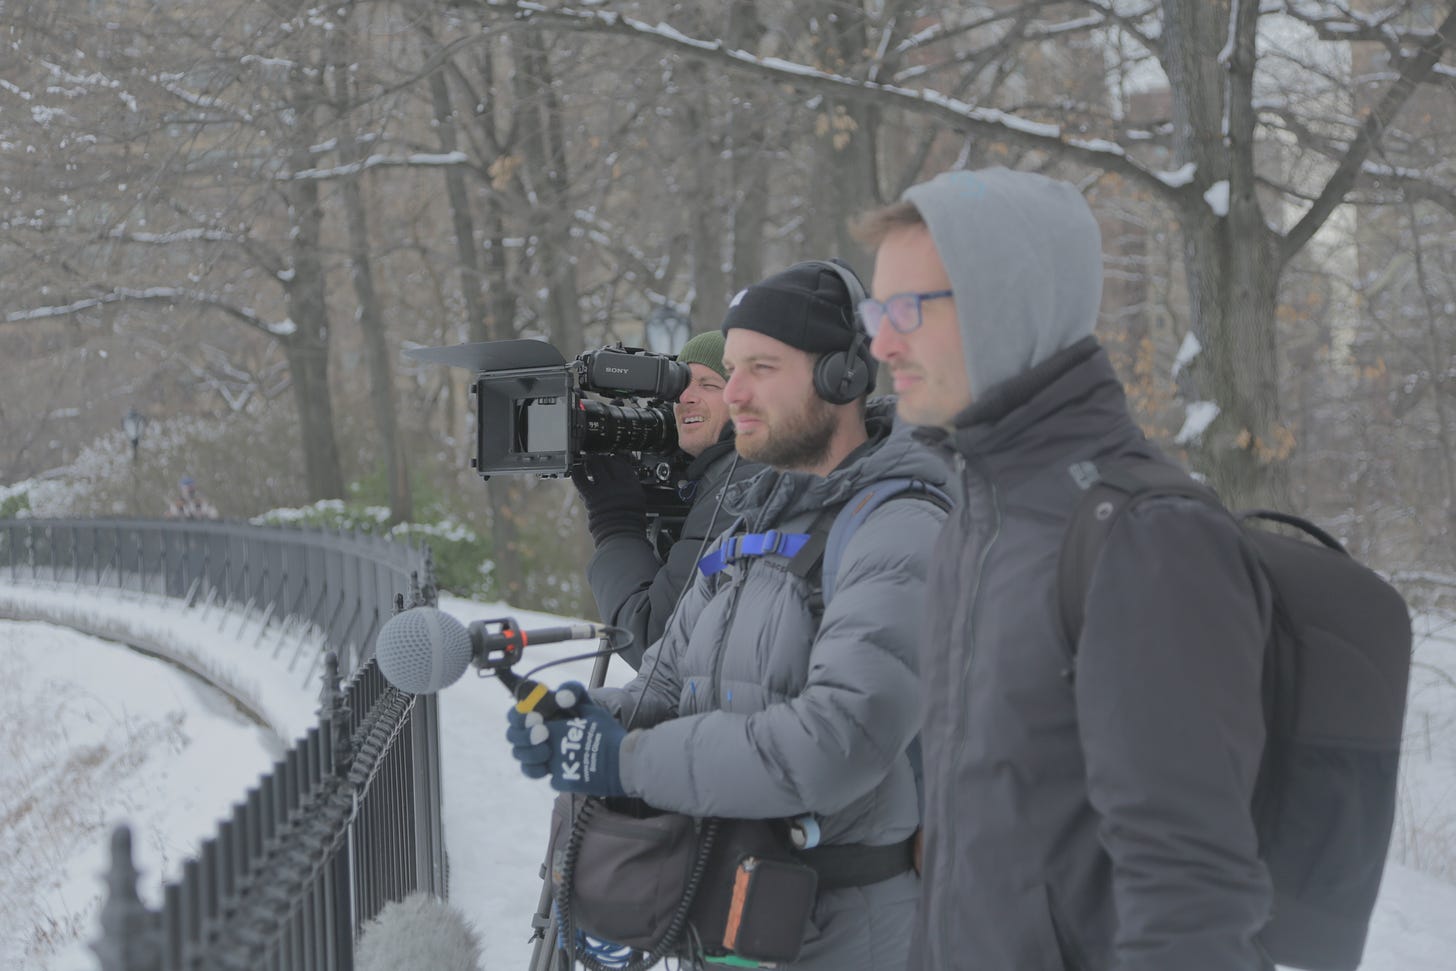 Me filming Tickled in snowy New York